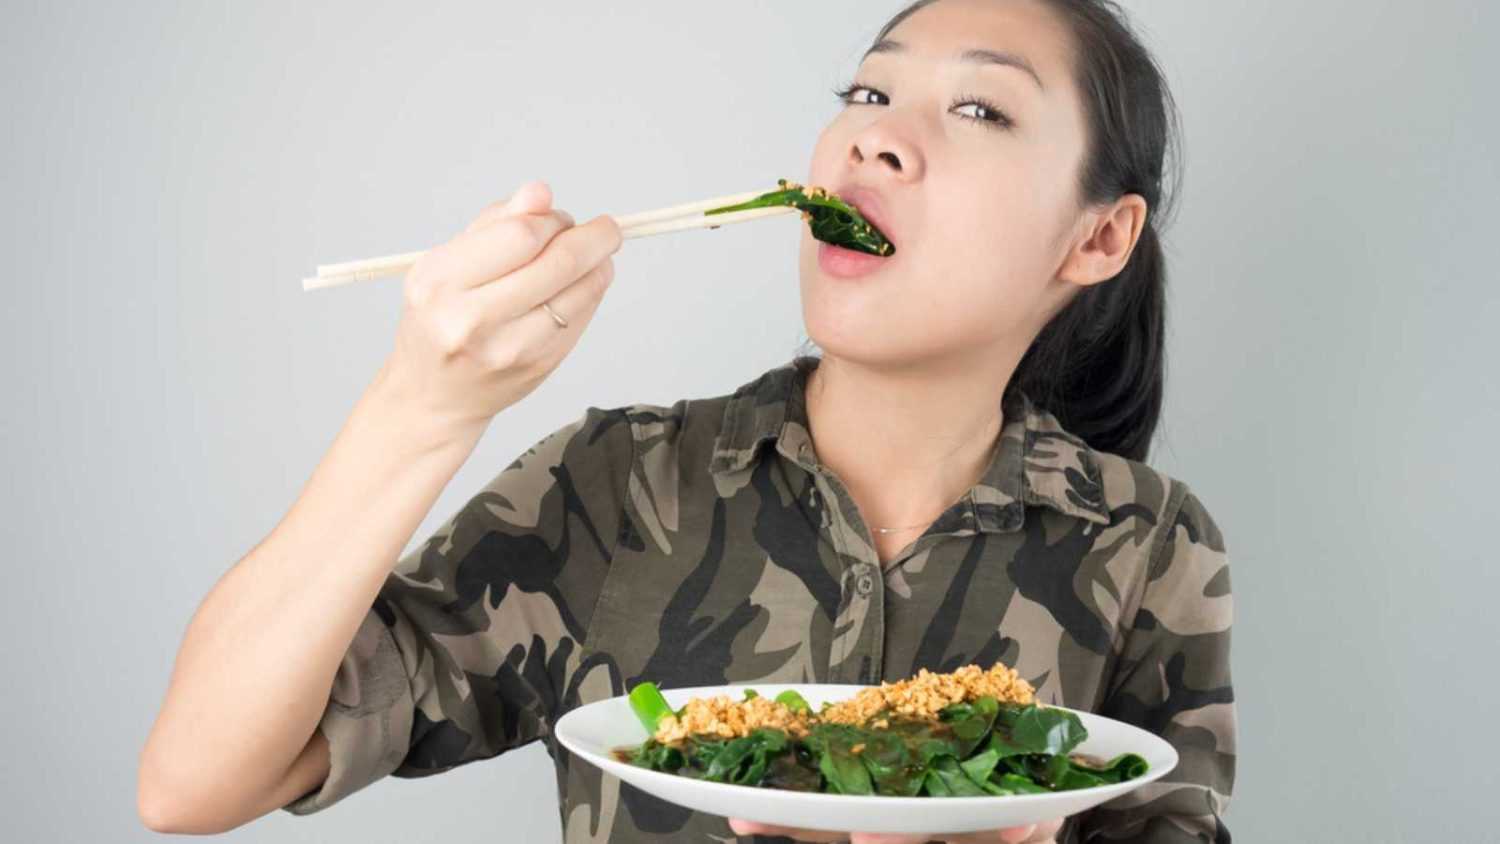 Asian woman eating kale fried in oyster sauce.